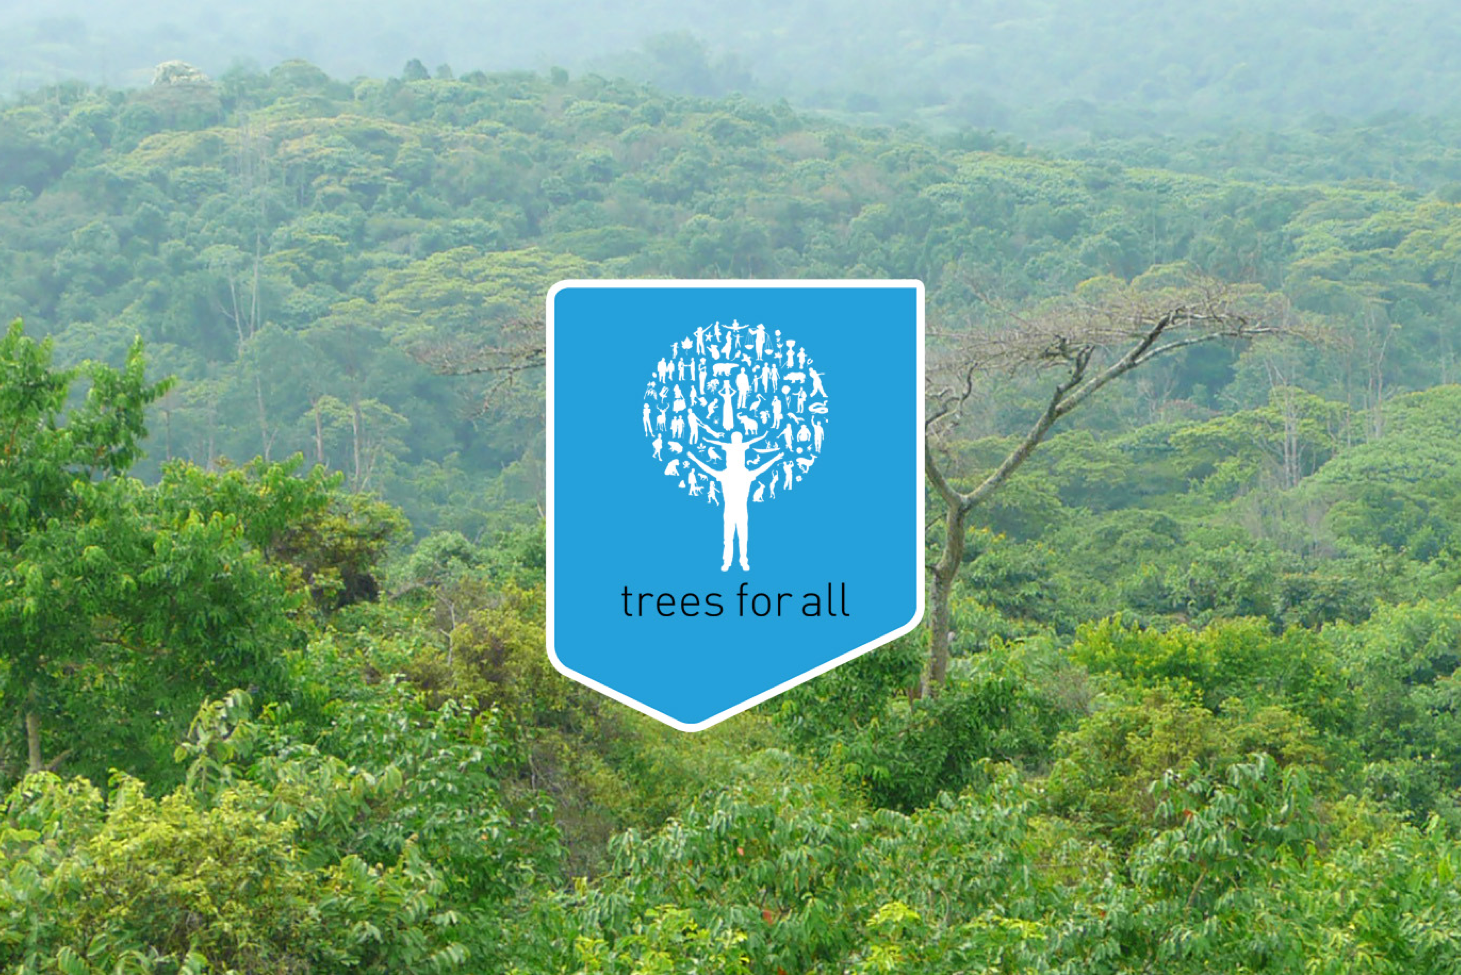 5. Trees for all